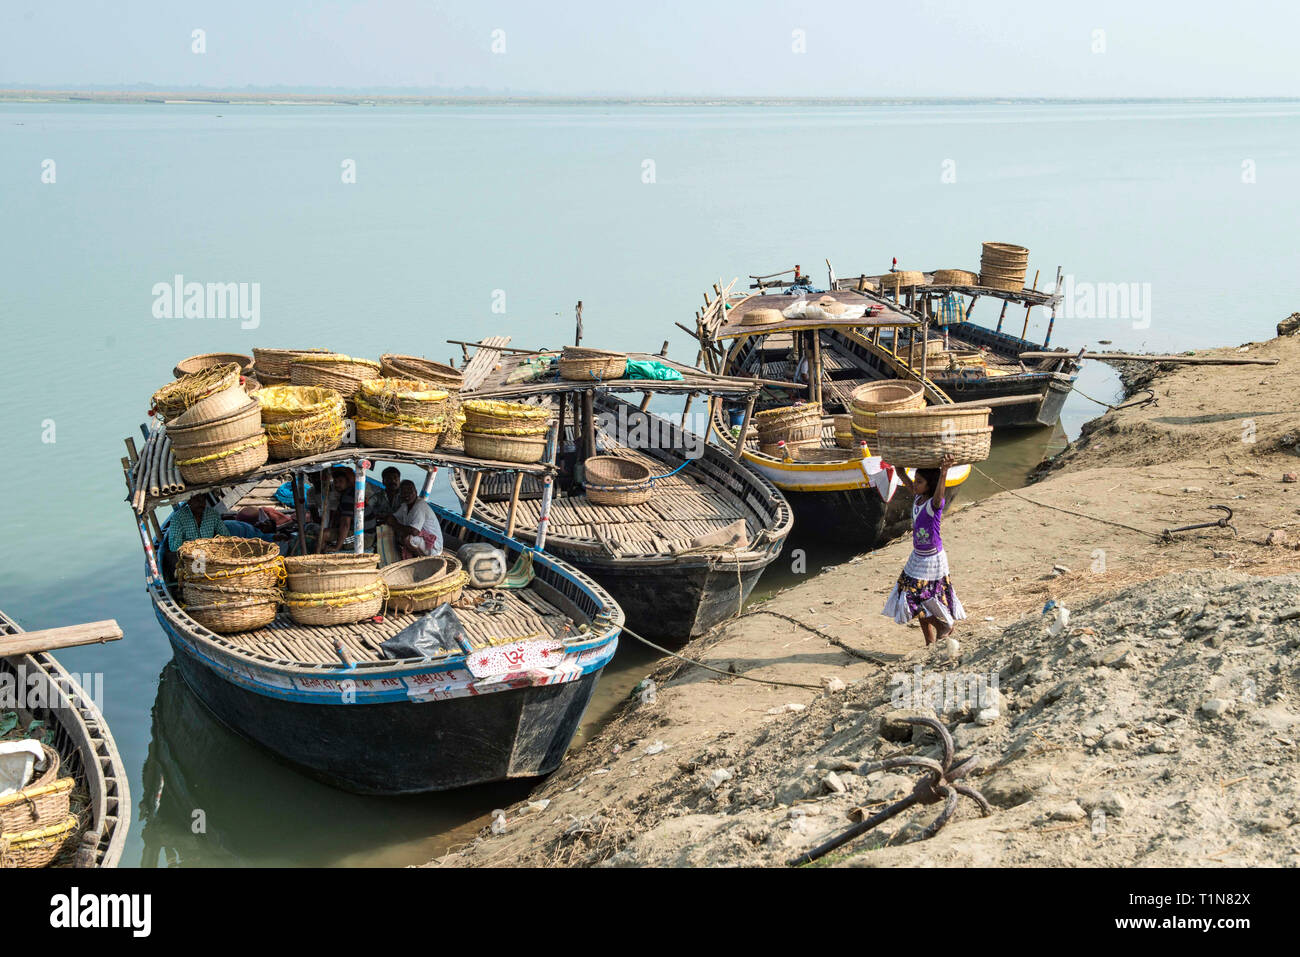 INDIA, BIHAR, RAJMAHAL,Small barges being loaded with baskets for transportation to a market along the river Ganges Stock Photo